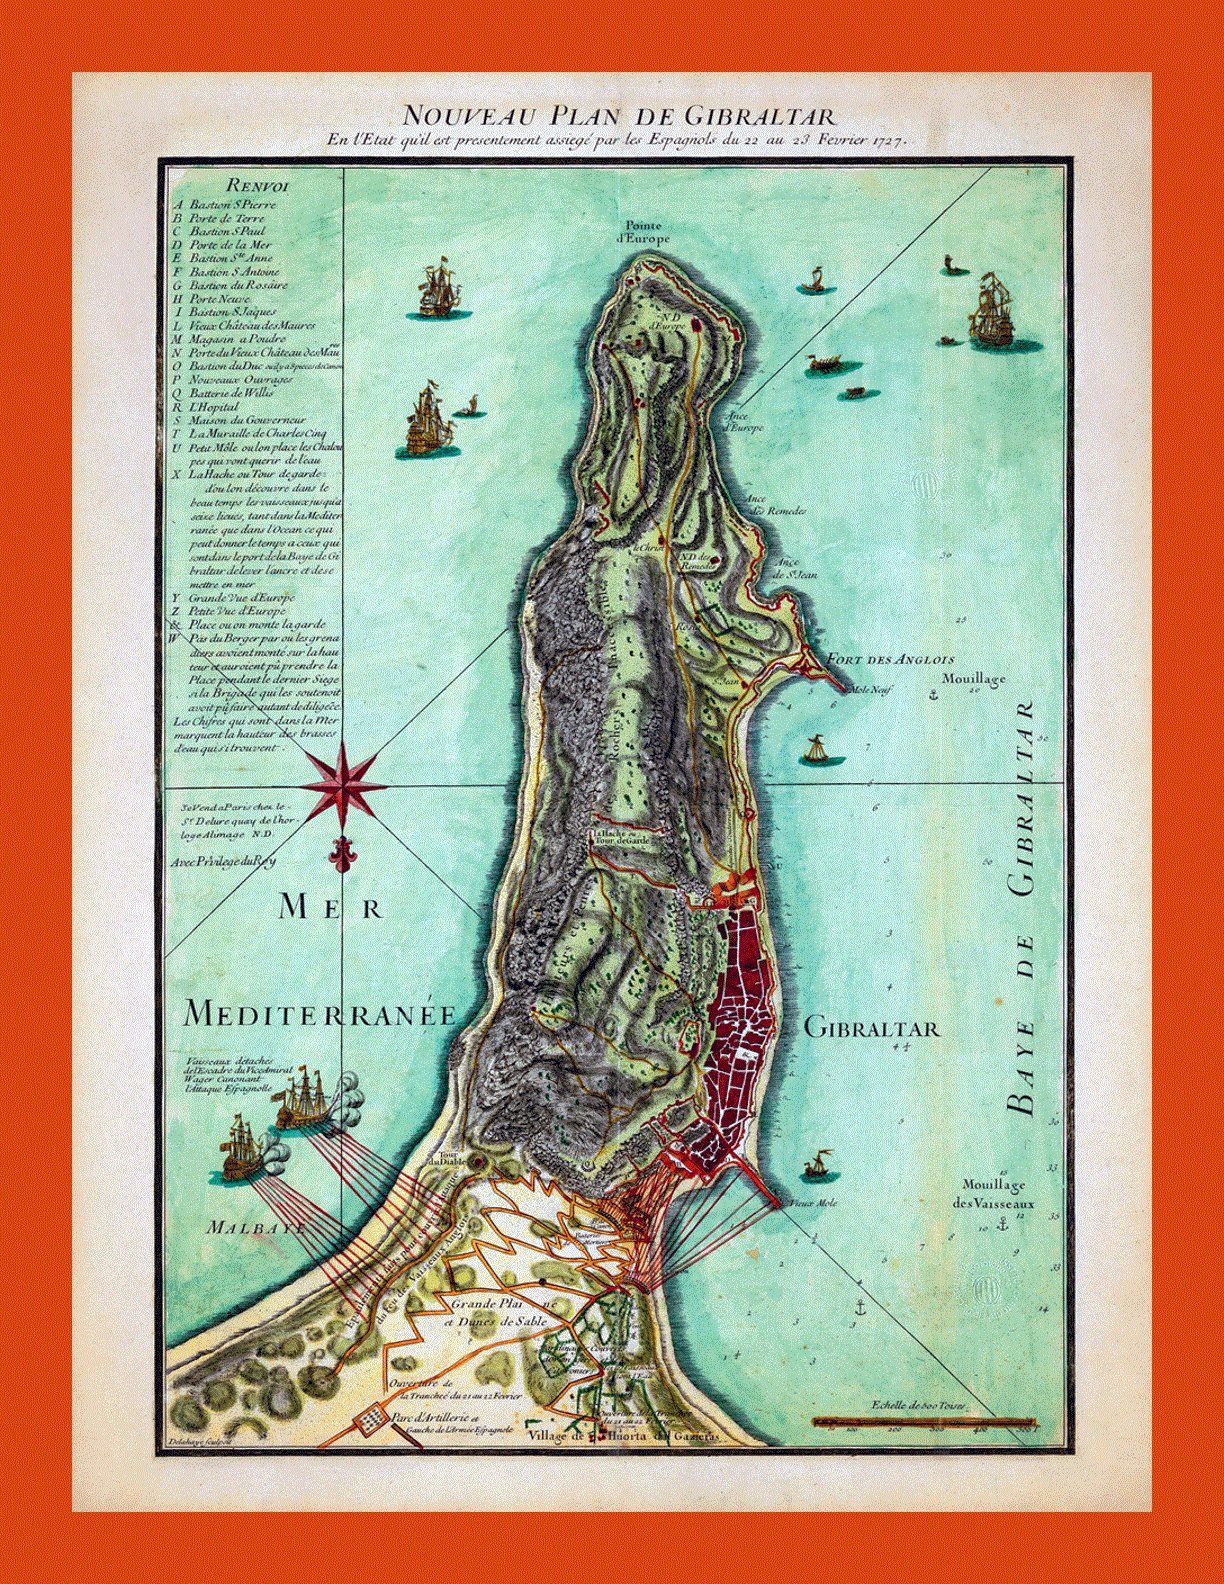 Old map of Gibraltar - 1727